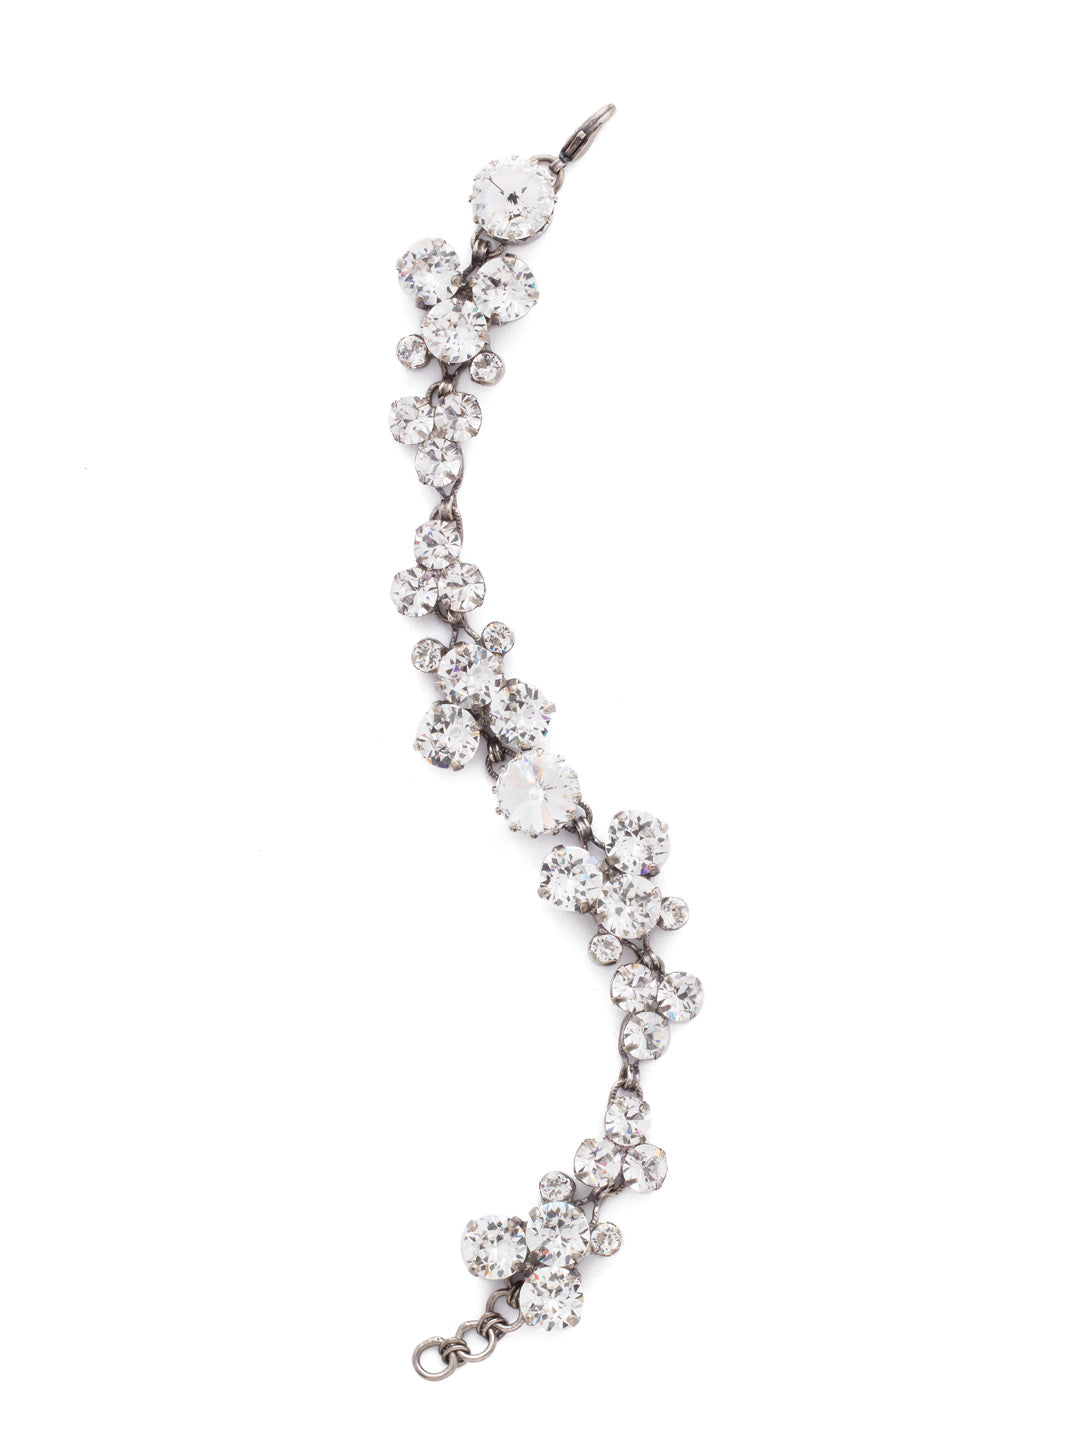 Well-Rounded Tennis Bracelet - BDH24ASCRY - <p>Our Well-Rounded Crystal Line Bracelet features an array of round crystals for all around sparkle. Crystal clusters form this exquisite bracelet for a magnificent statement. From Sorrelli's Crystal collection in our Antique Silver-tone finish.</p>